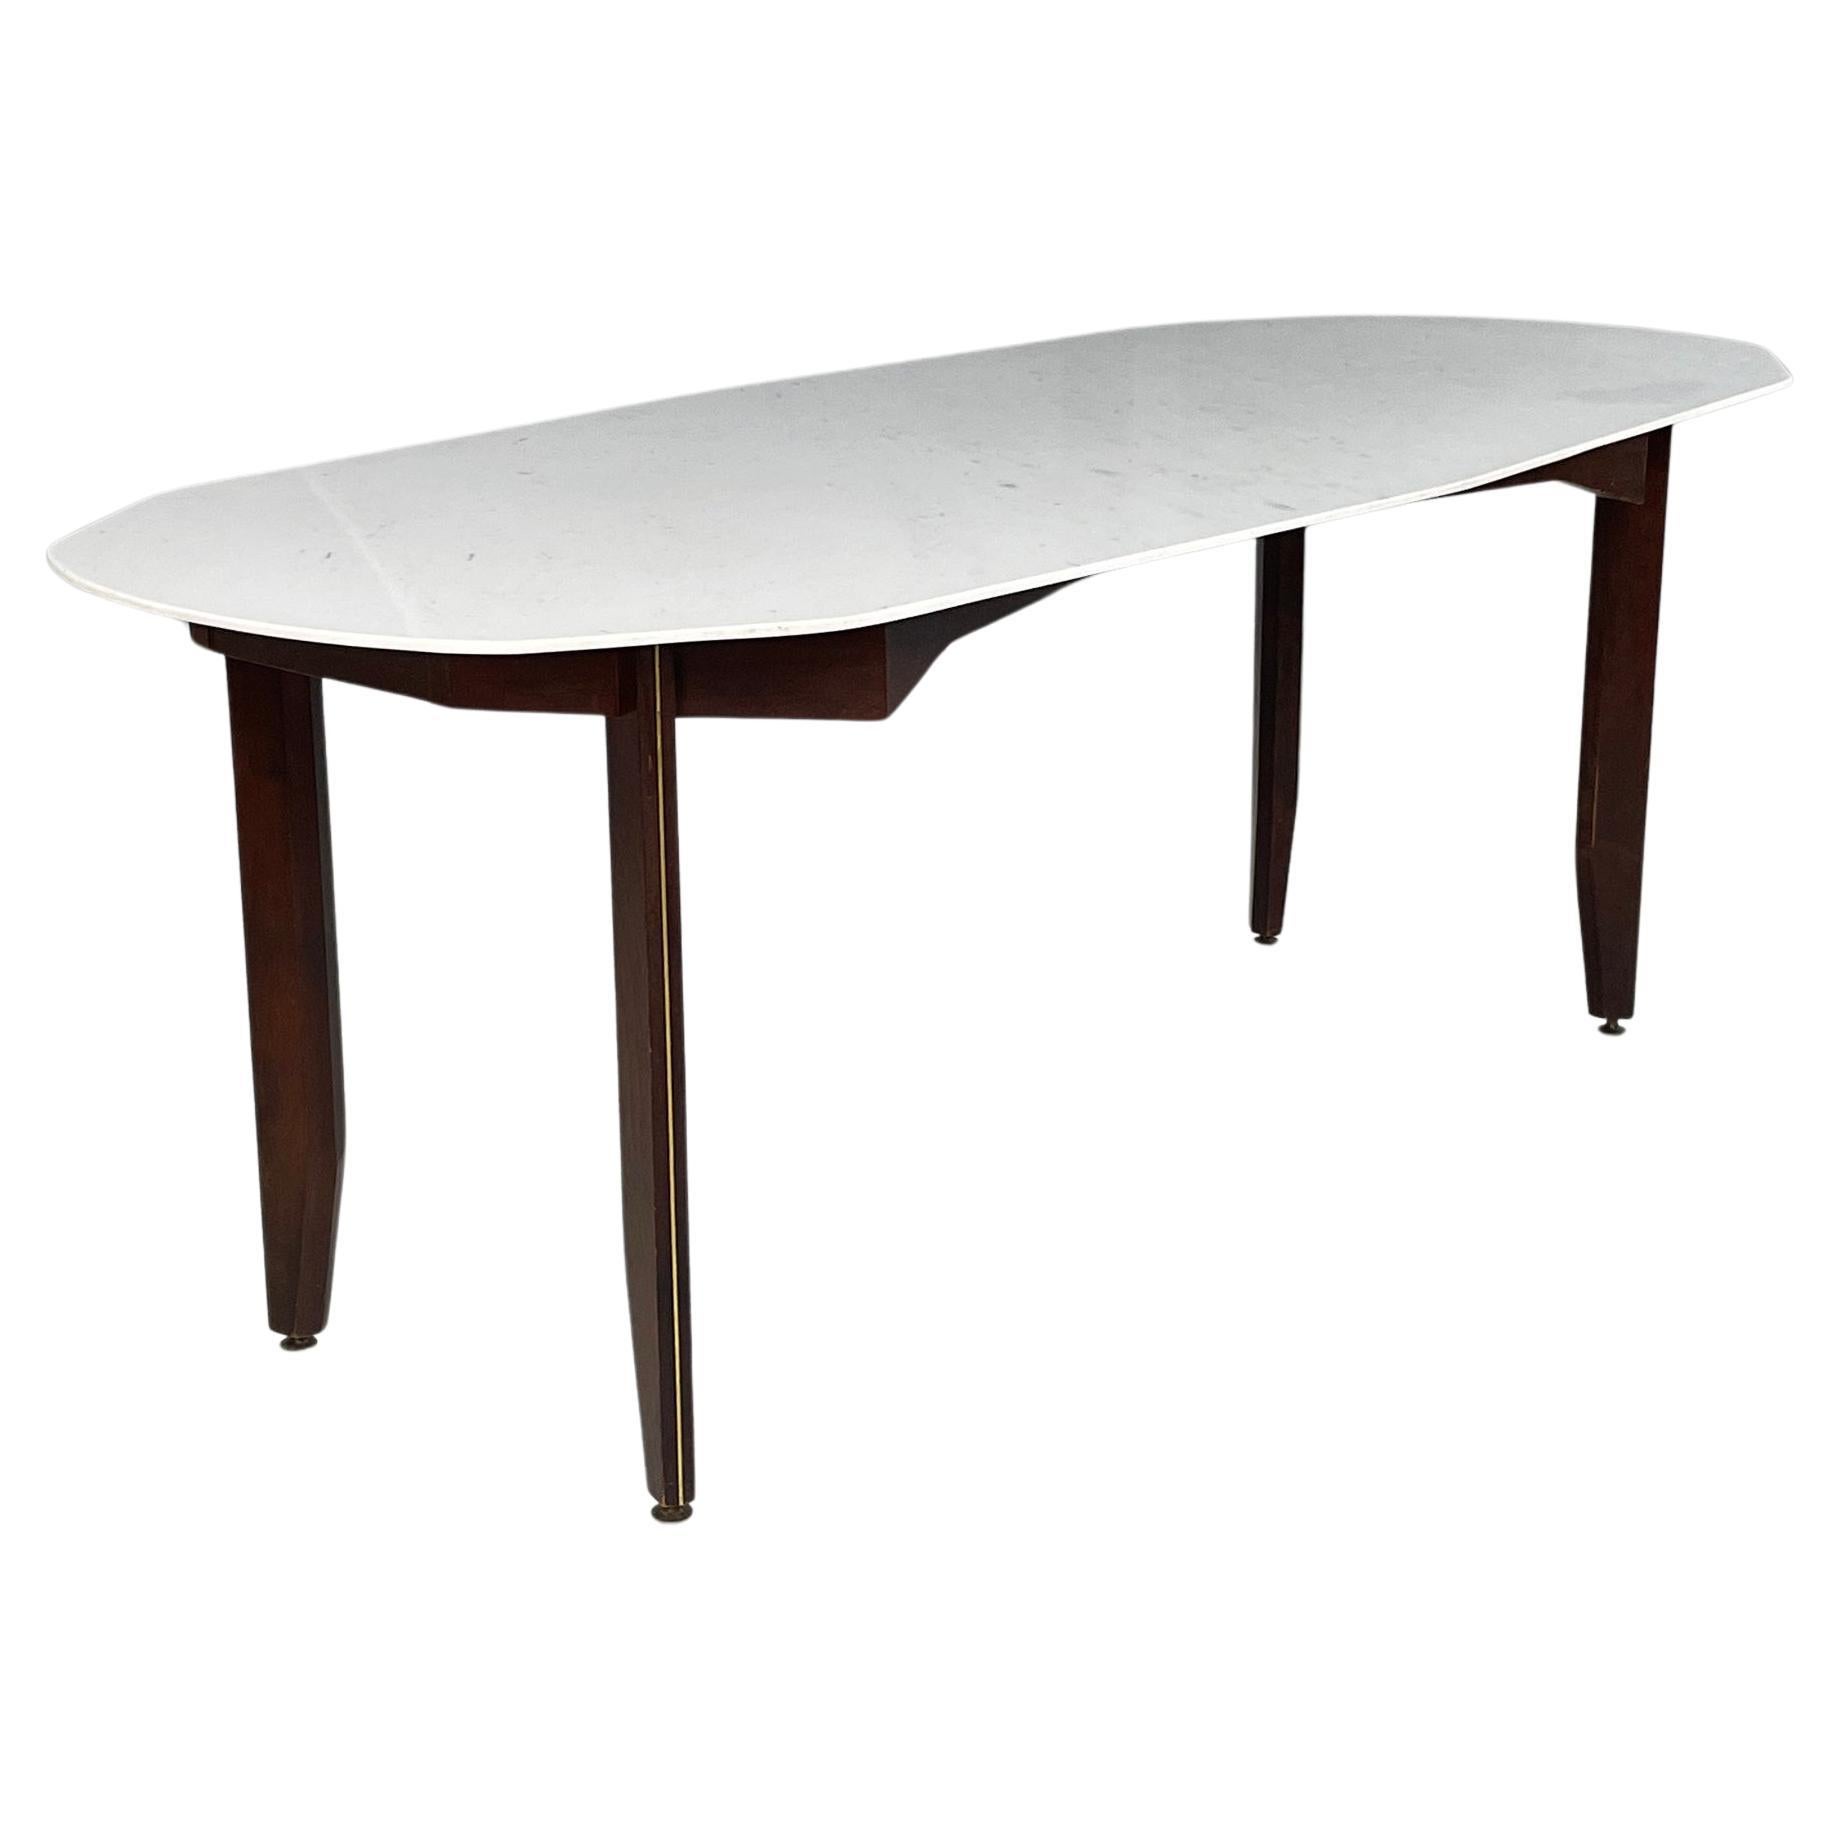 Italian mid-century modern Dining table in marble, wood and bass, 1960s For Sale